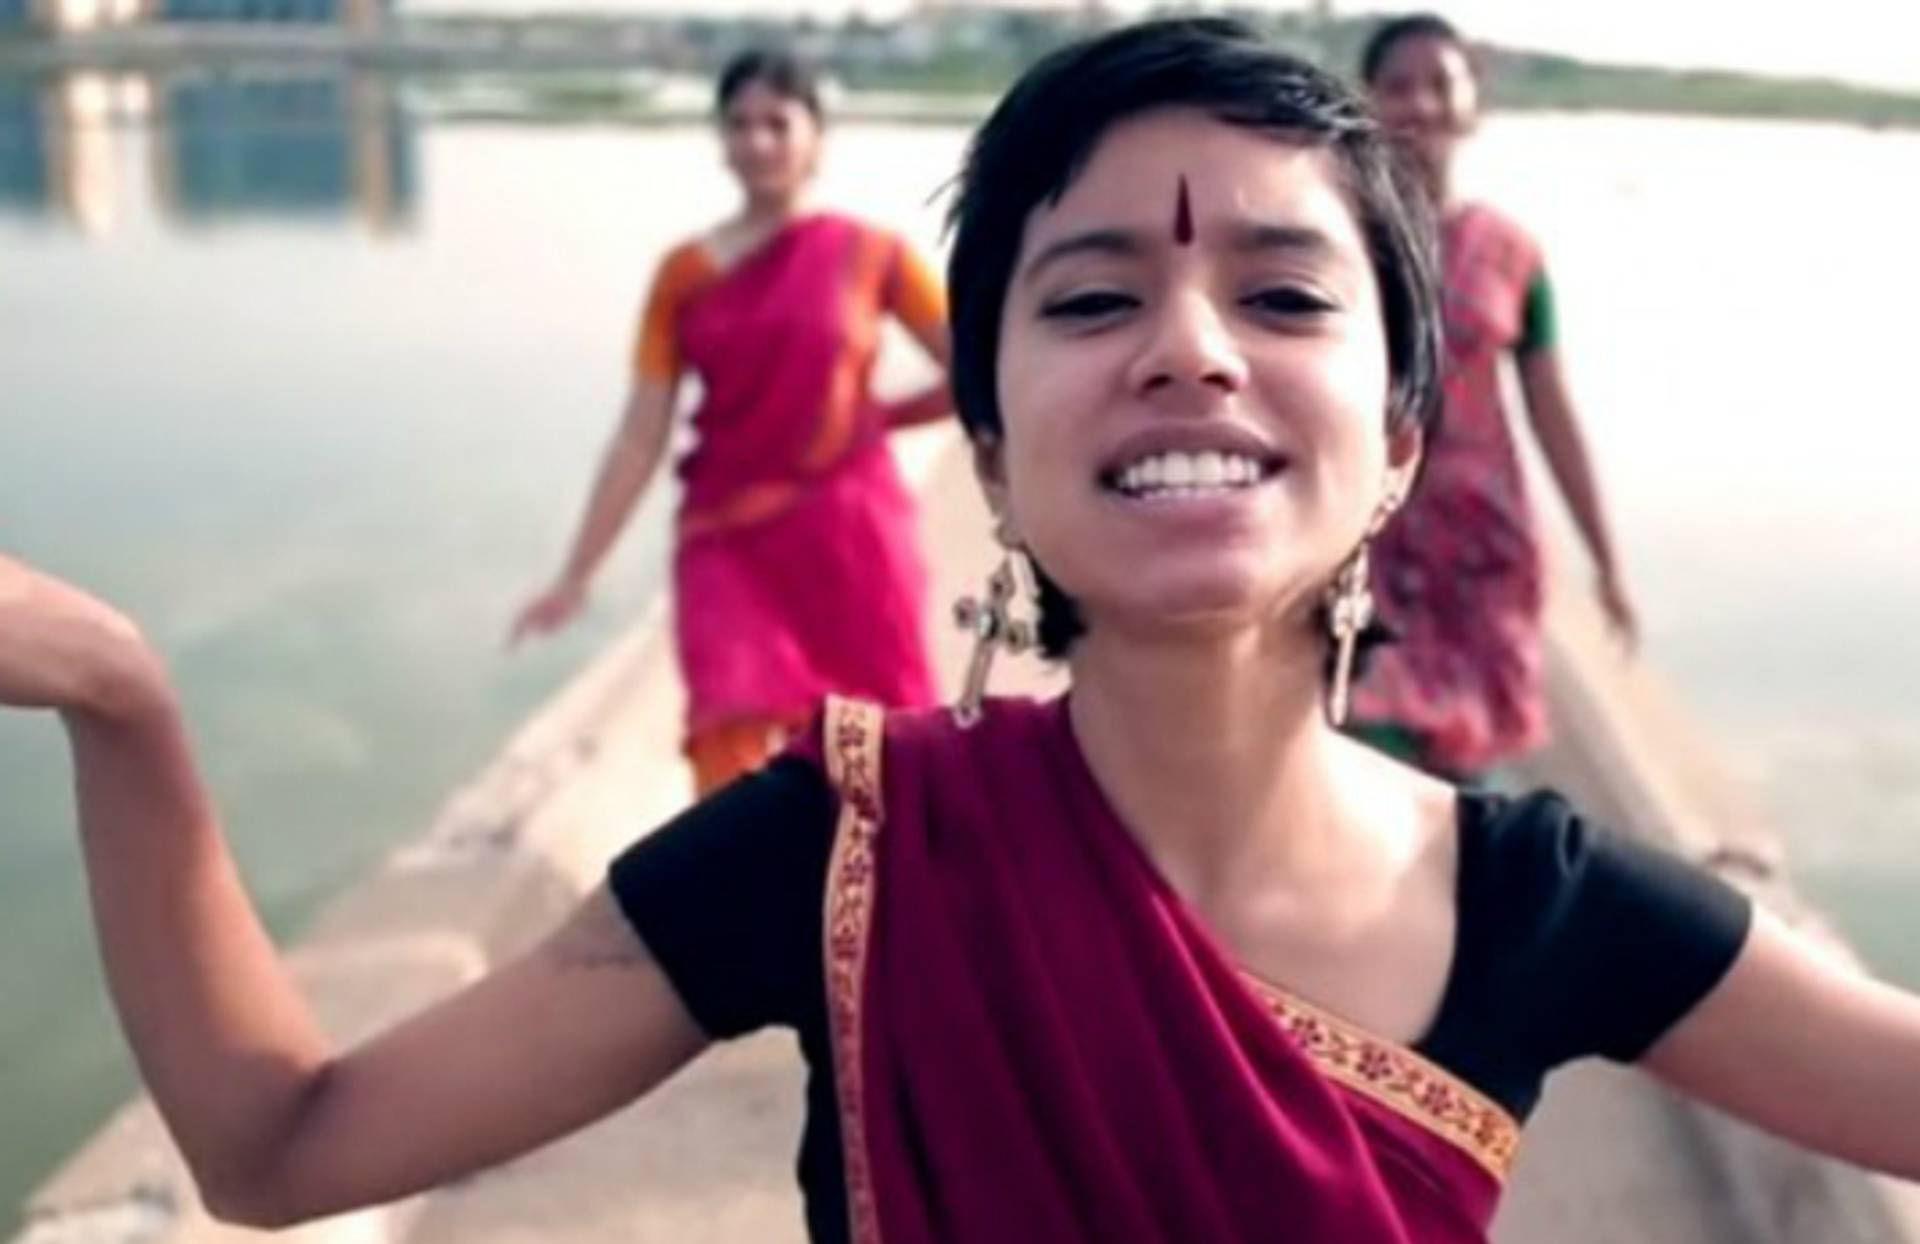 A rap shaming Unilever goes viral in India